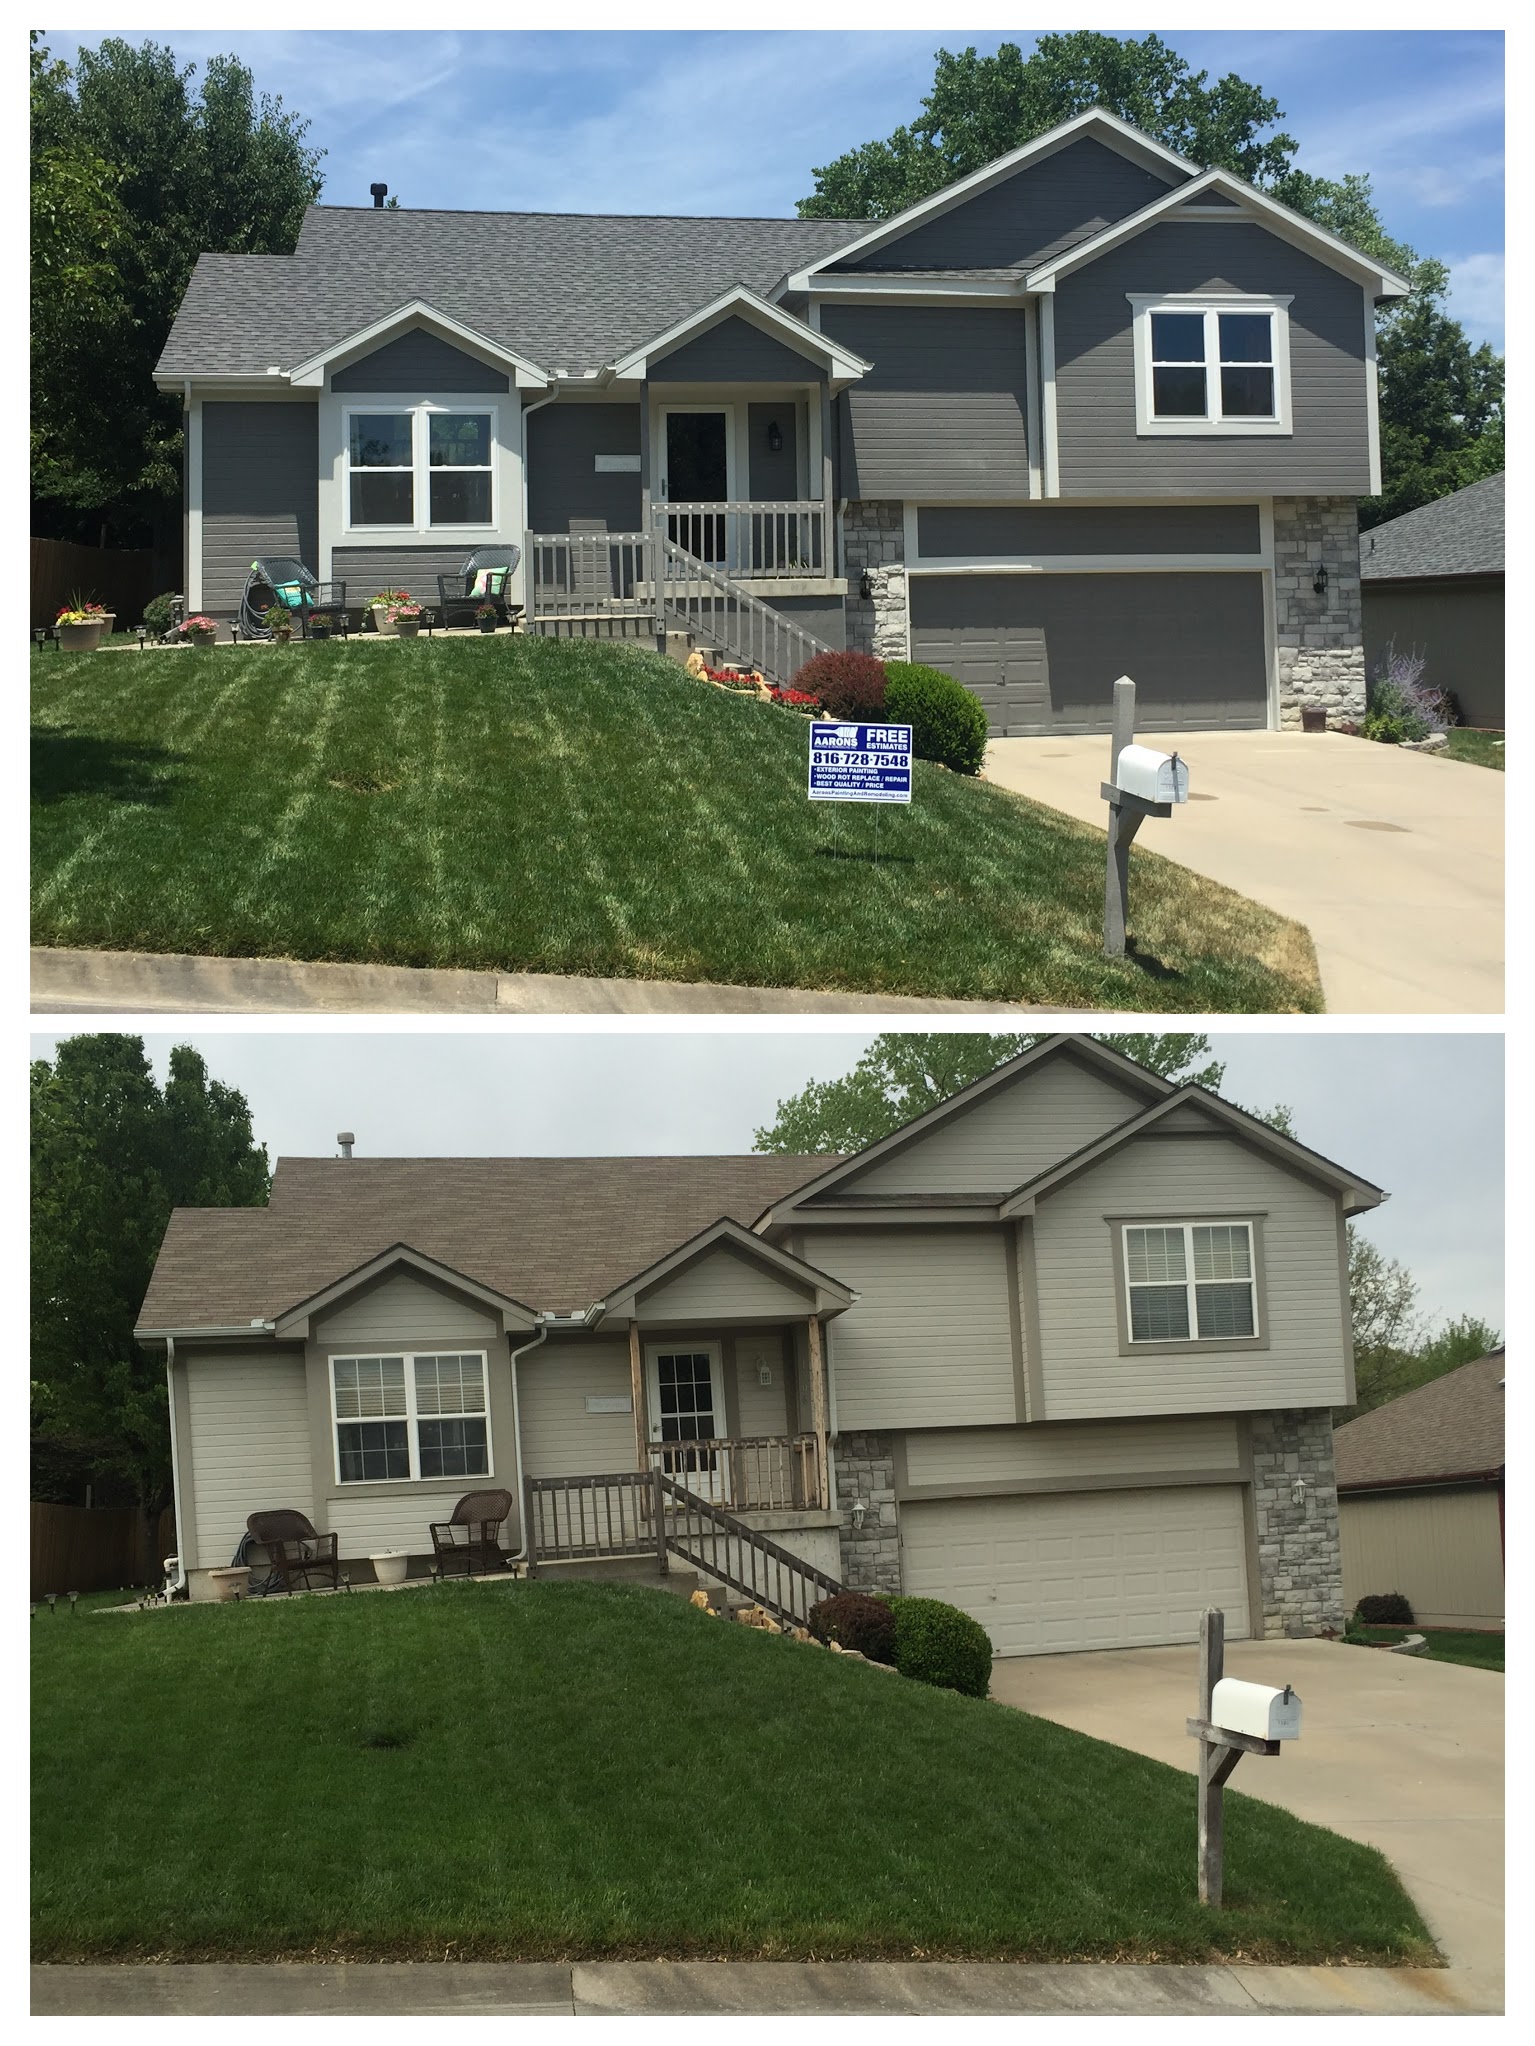  Exterior Painting Overland Park Ks for Living room